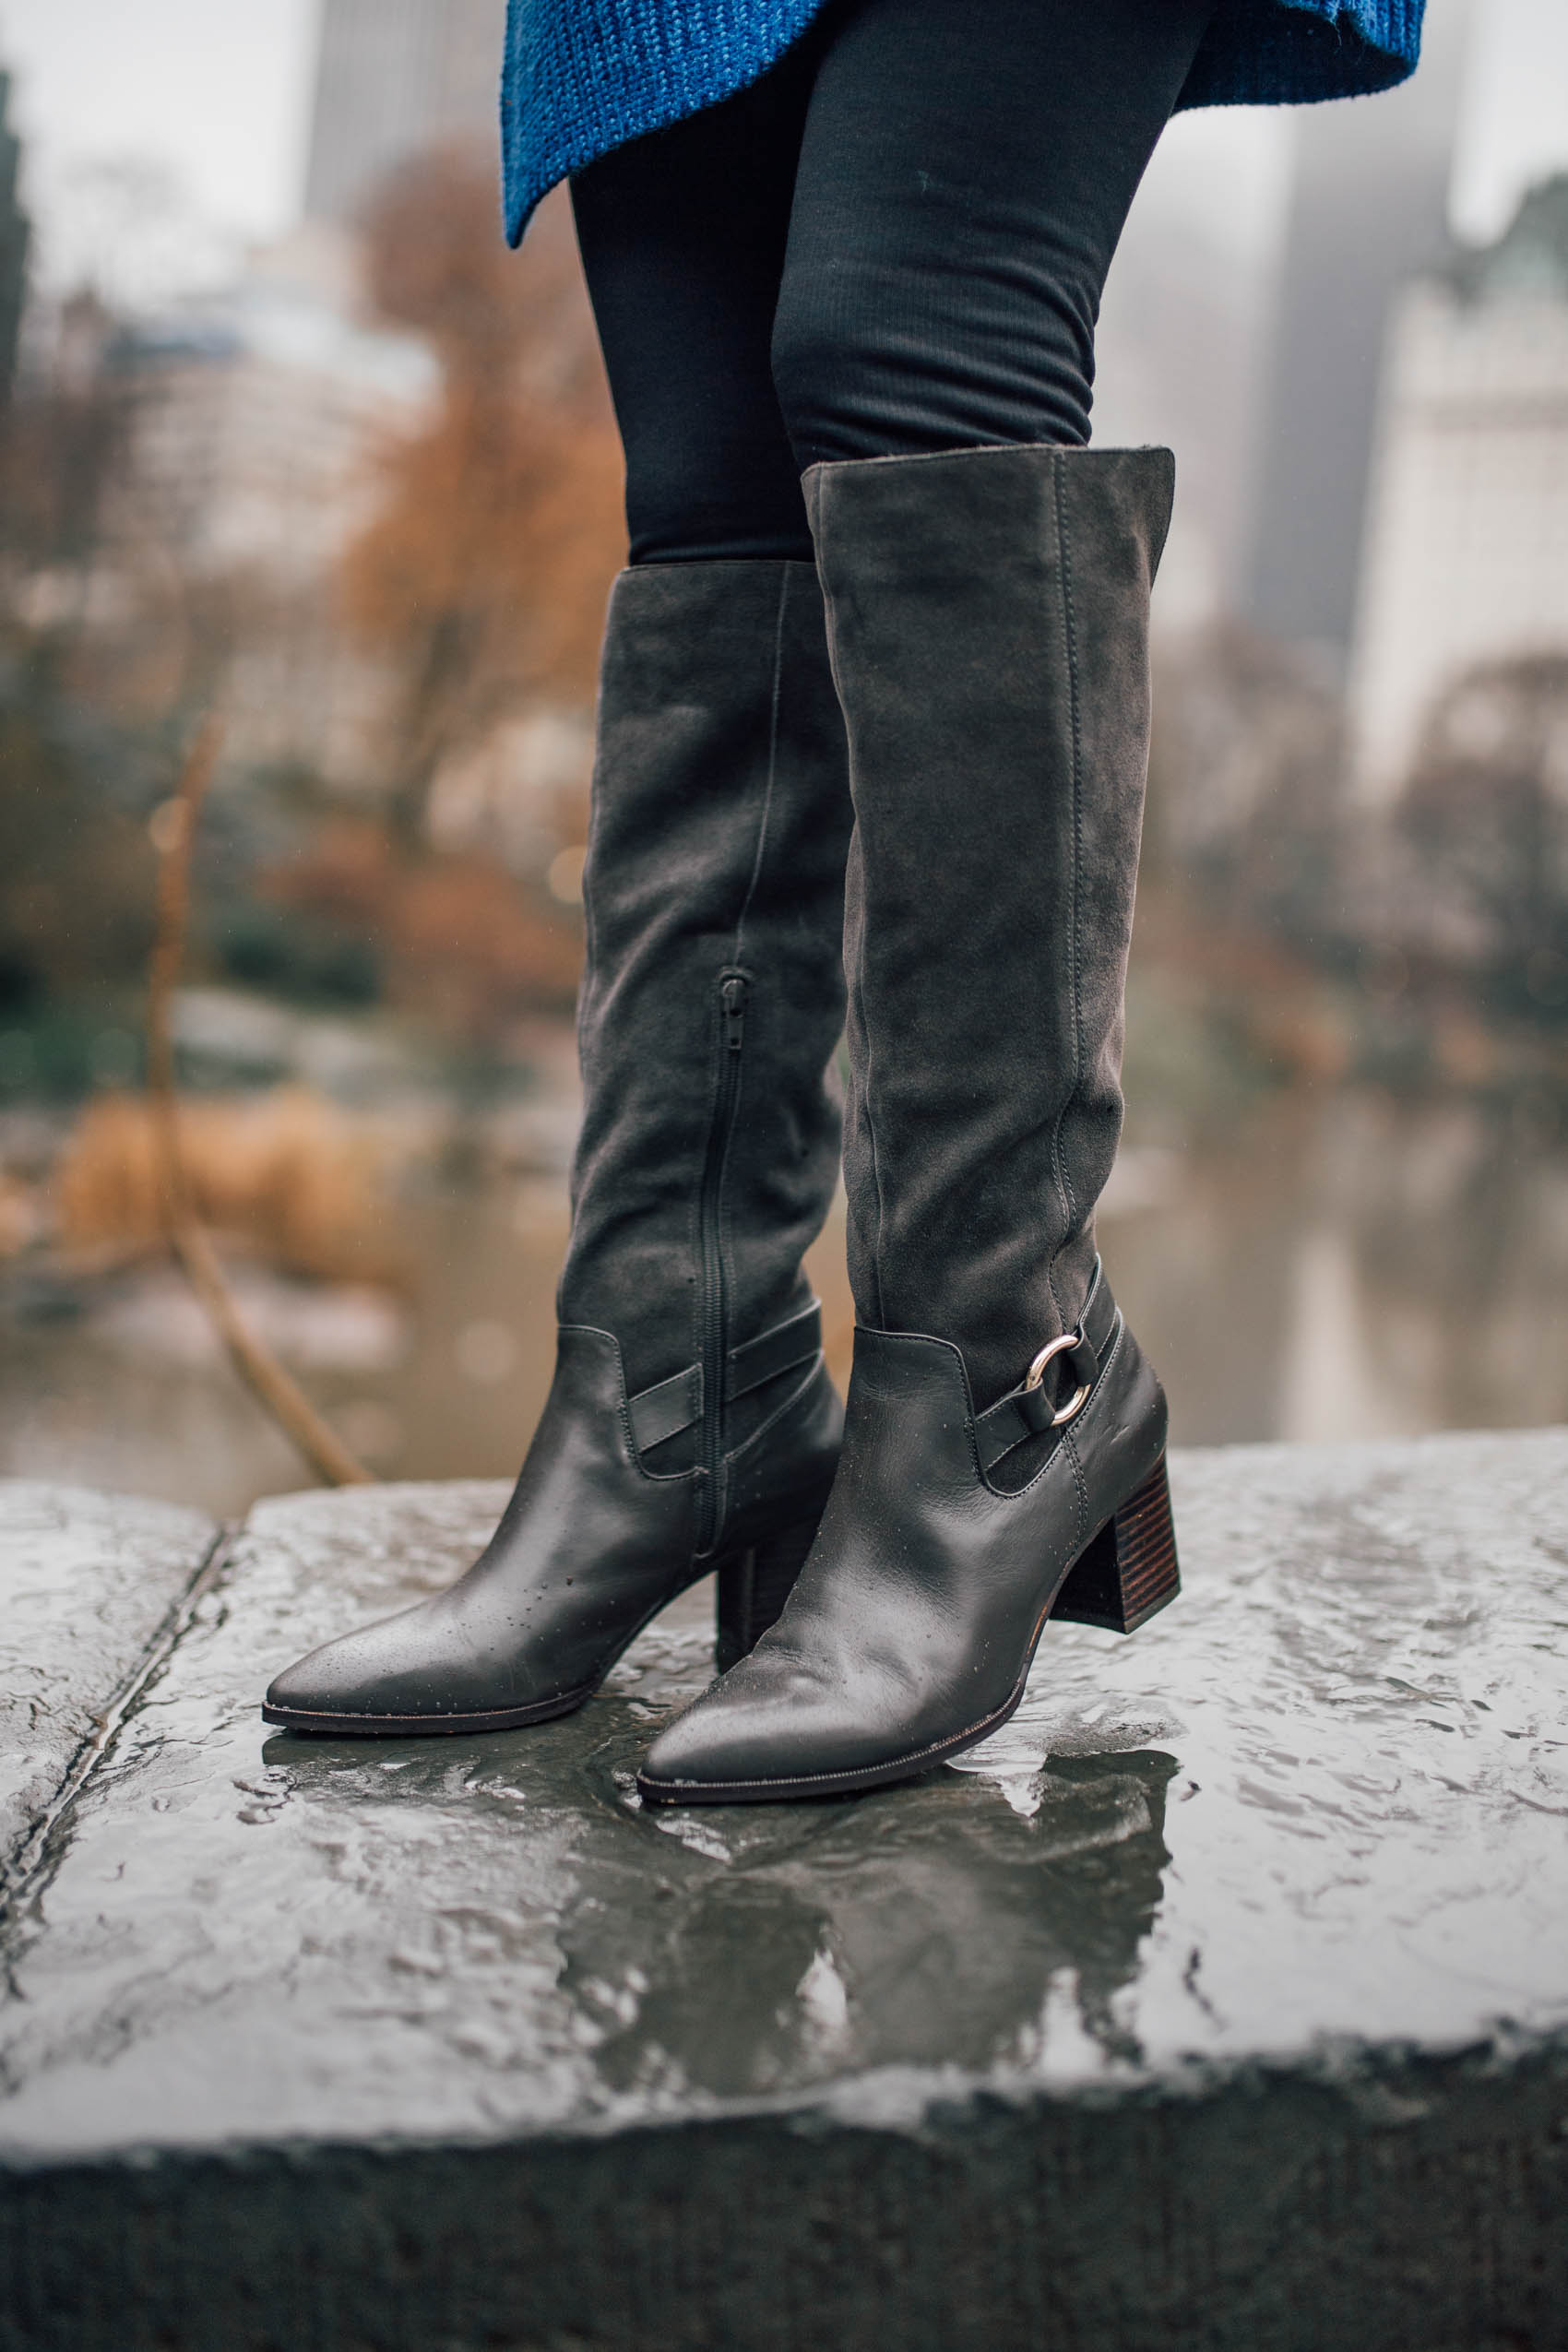 Blogger Hoang-Kim wearing the Daleena boots in Iron from Sole Society